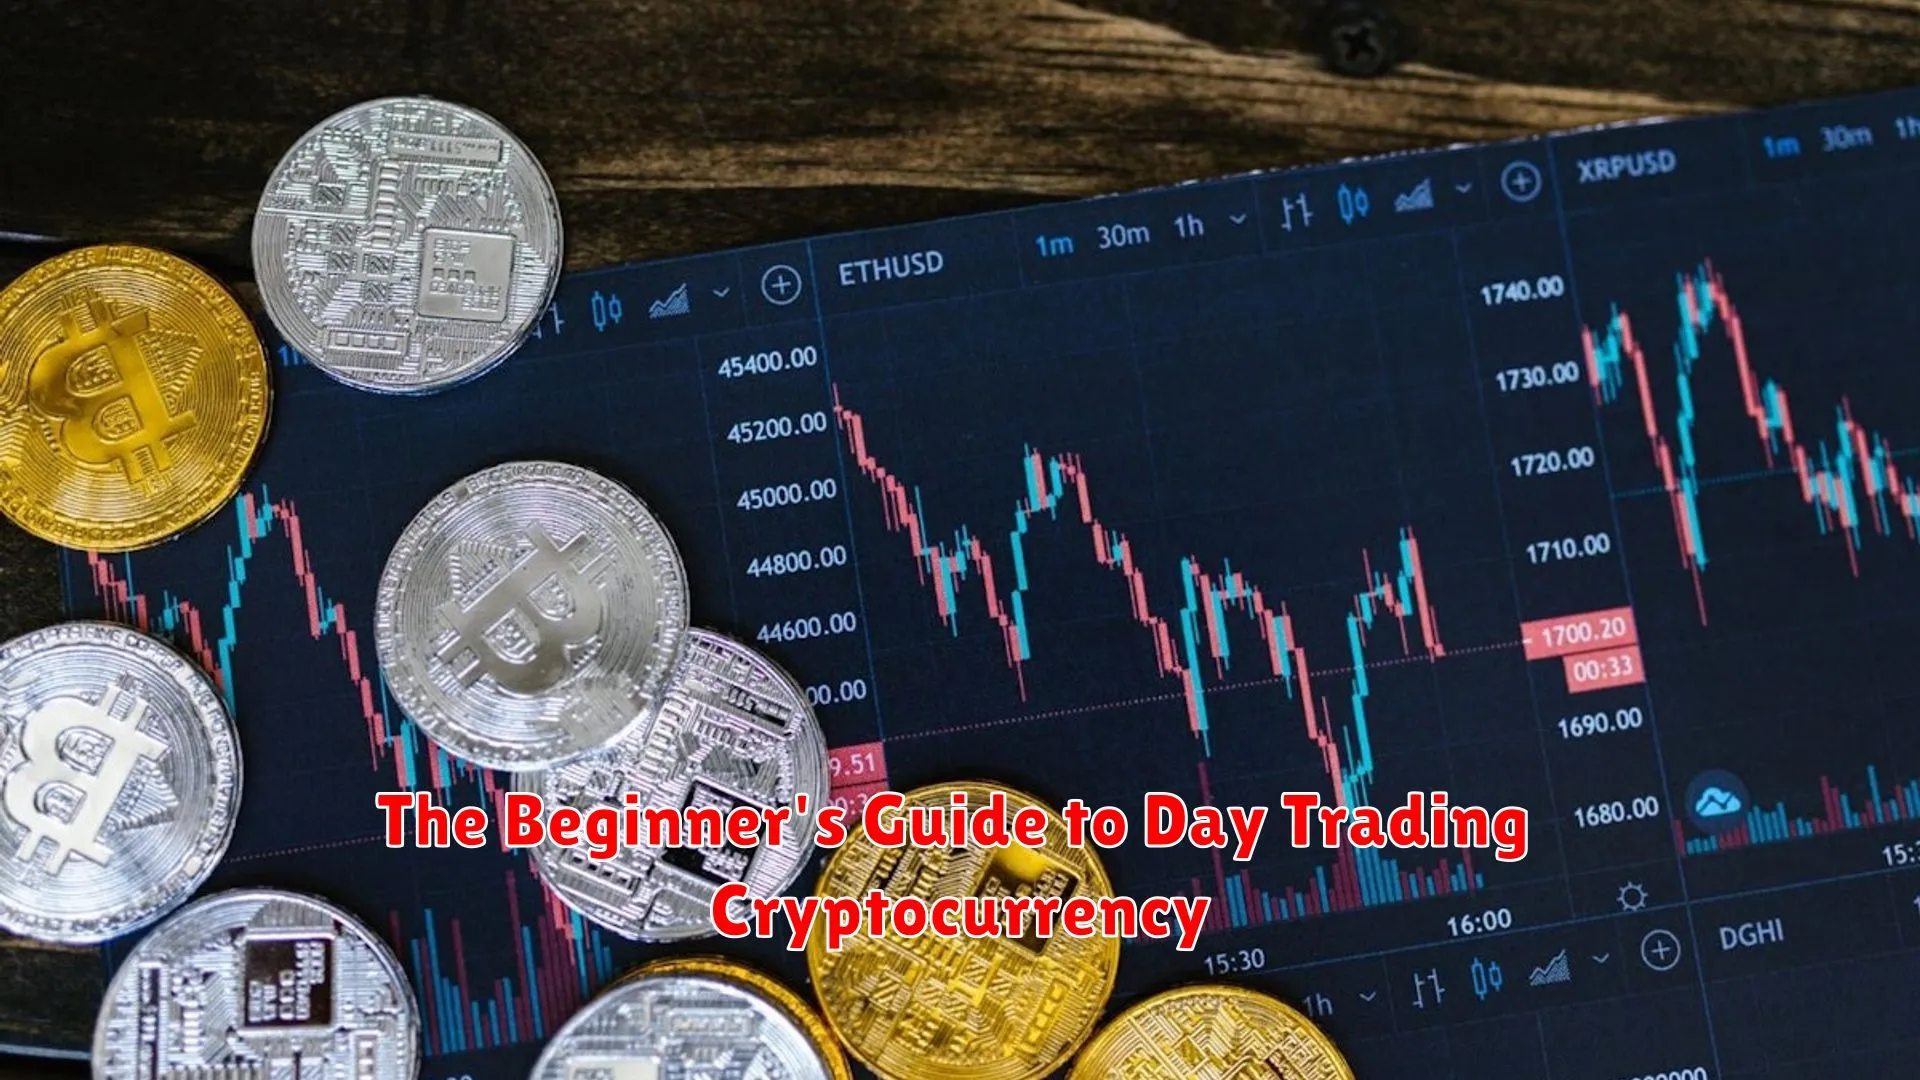 The Beginner's Guide to Day Trading Cryptocurrency